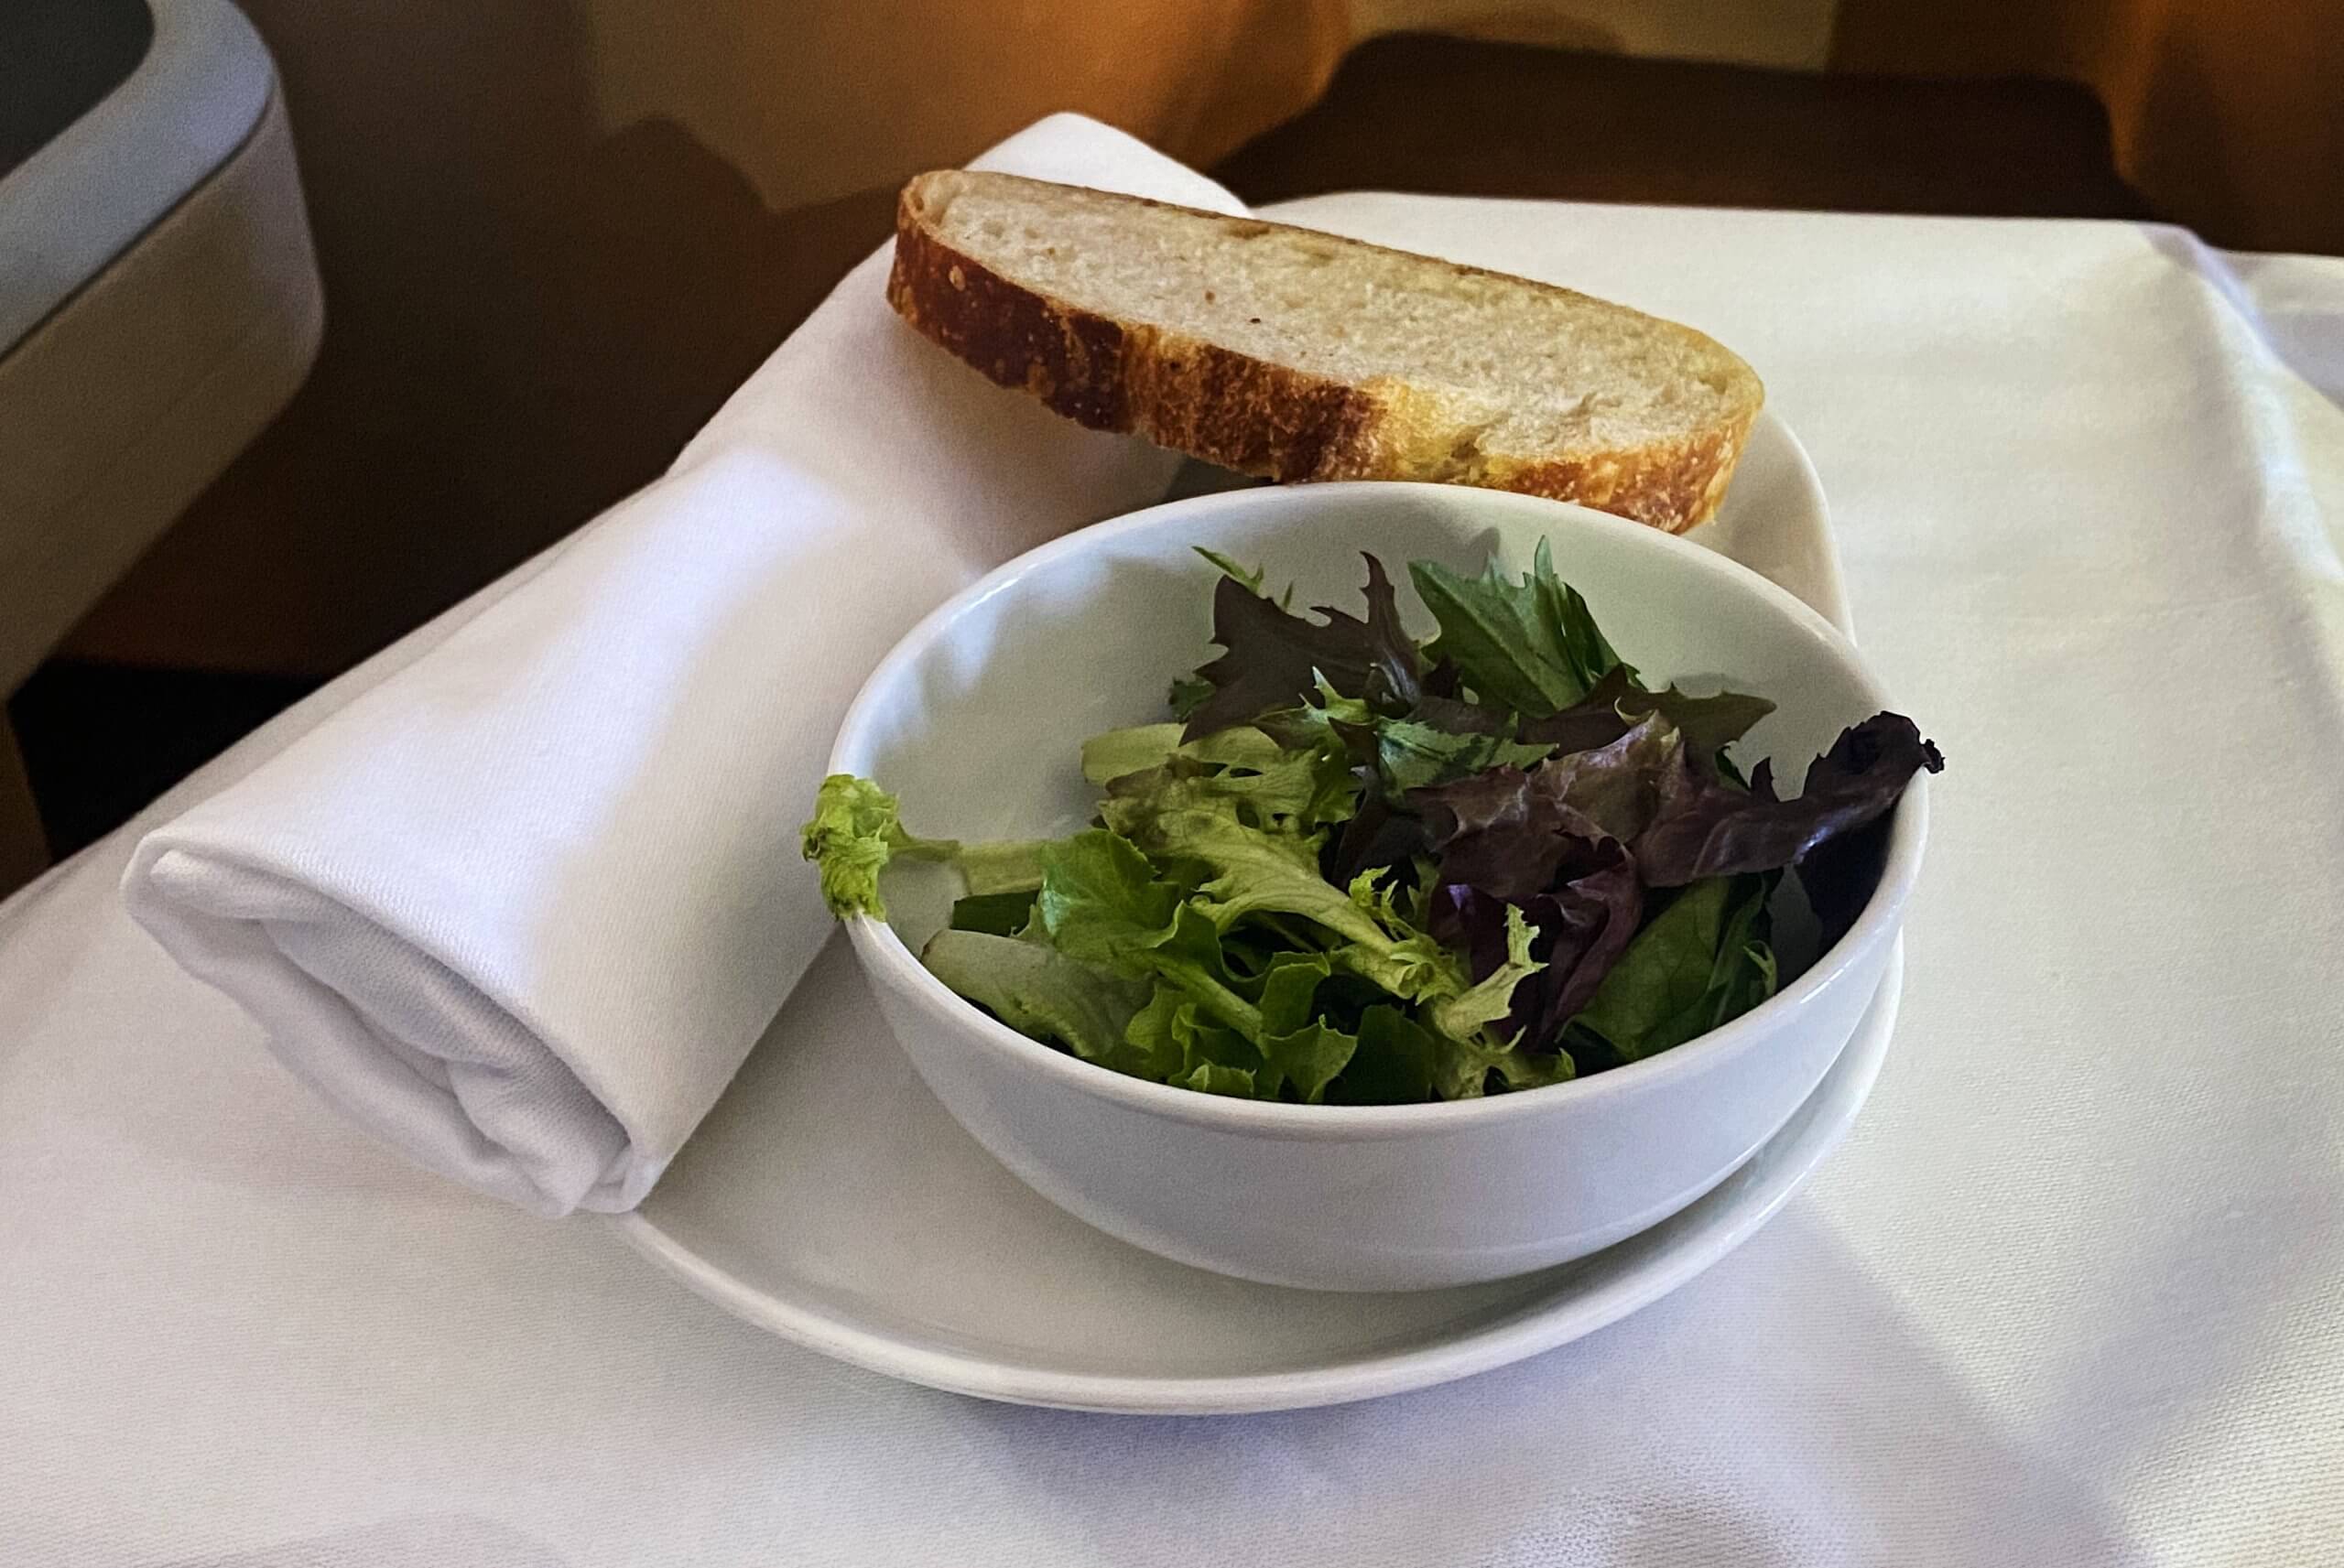 a bowl of salad and bread on a plate